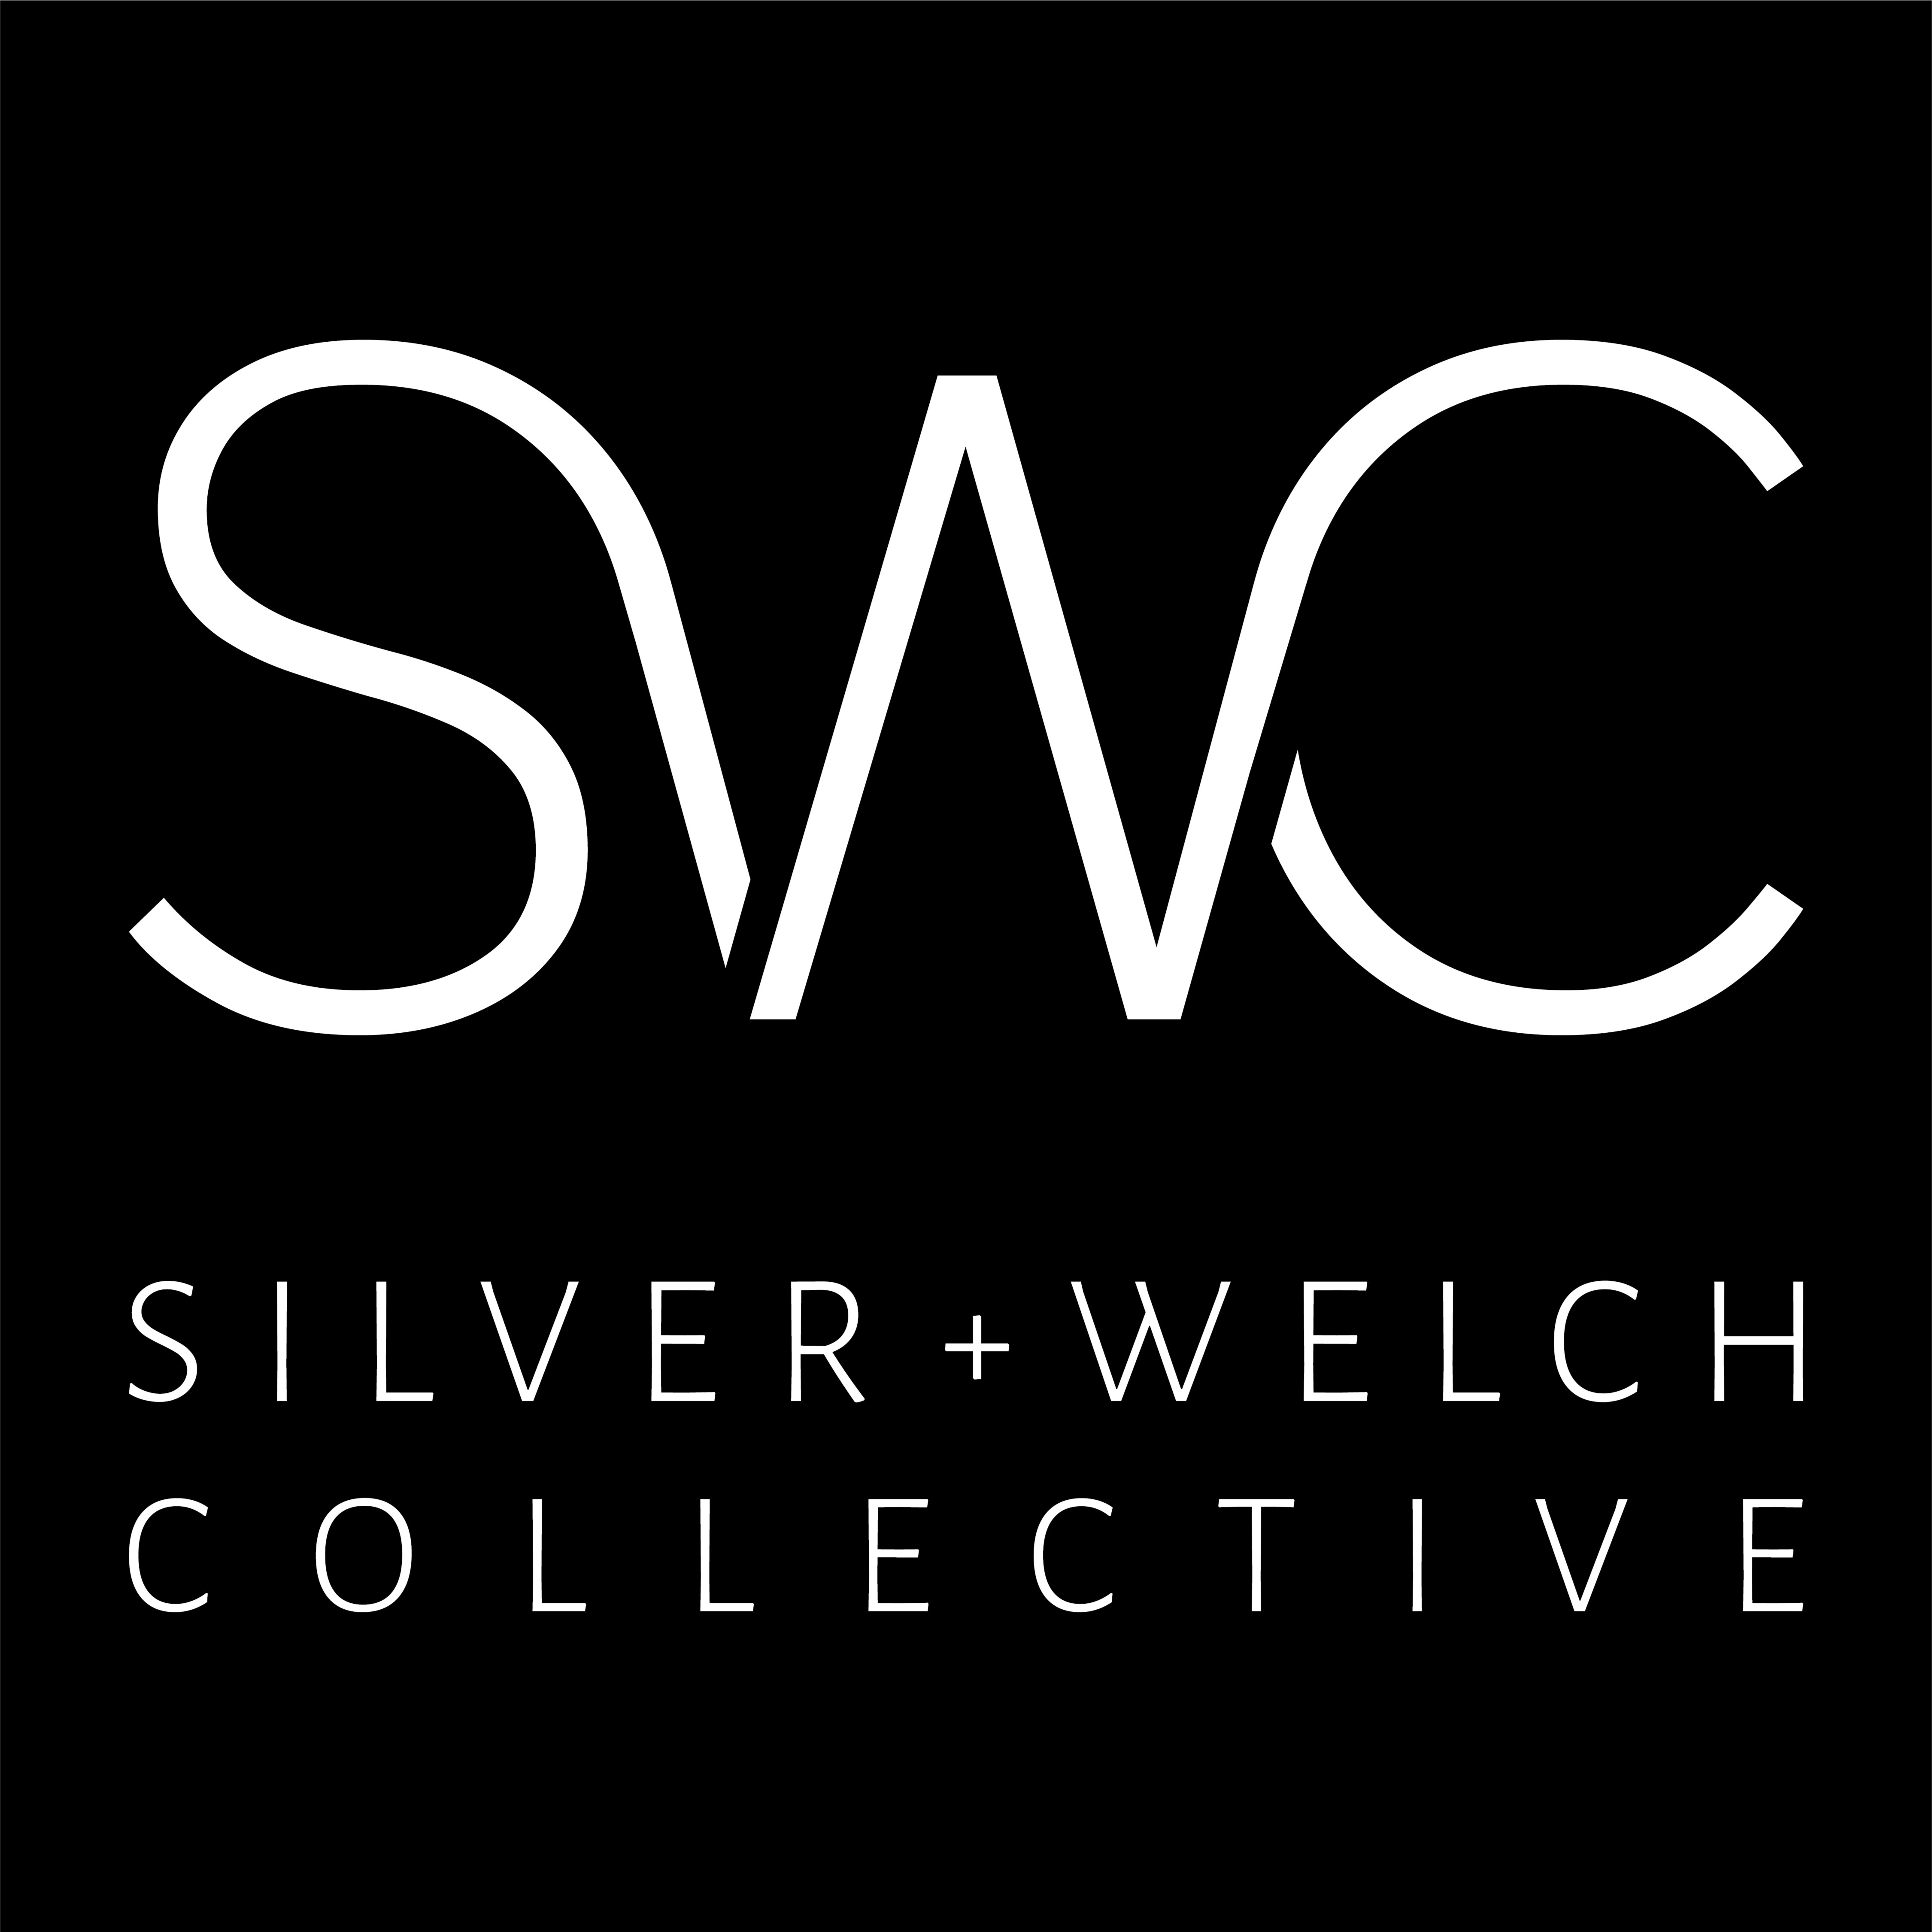 Silver + Welch Collective, Agent in  - Compass